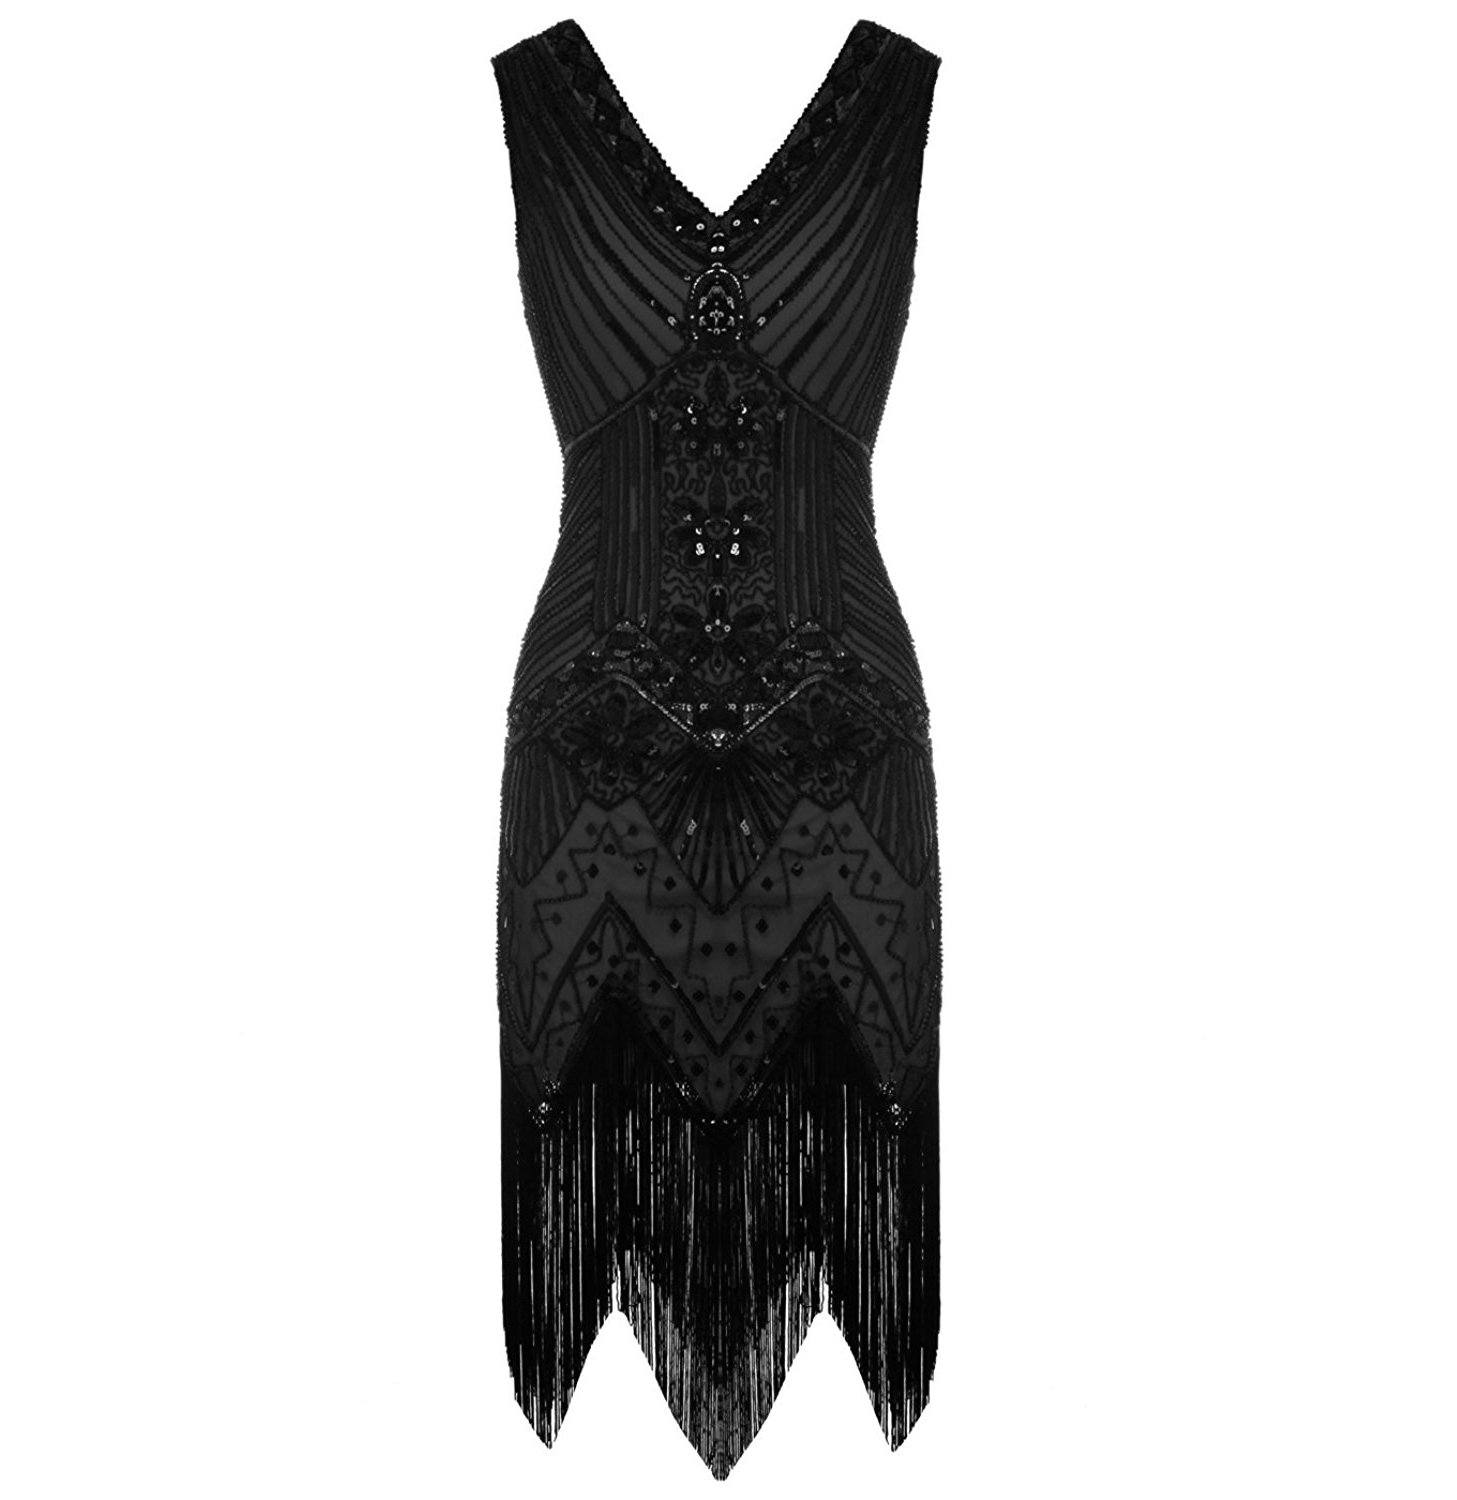 Black Vintage Gatsby Dress Beaded Fringed 1920s Evening Party